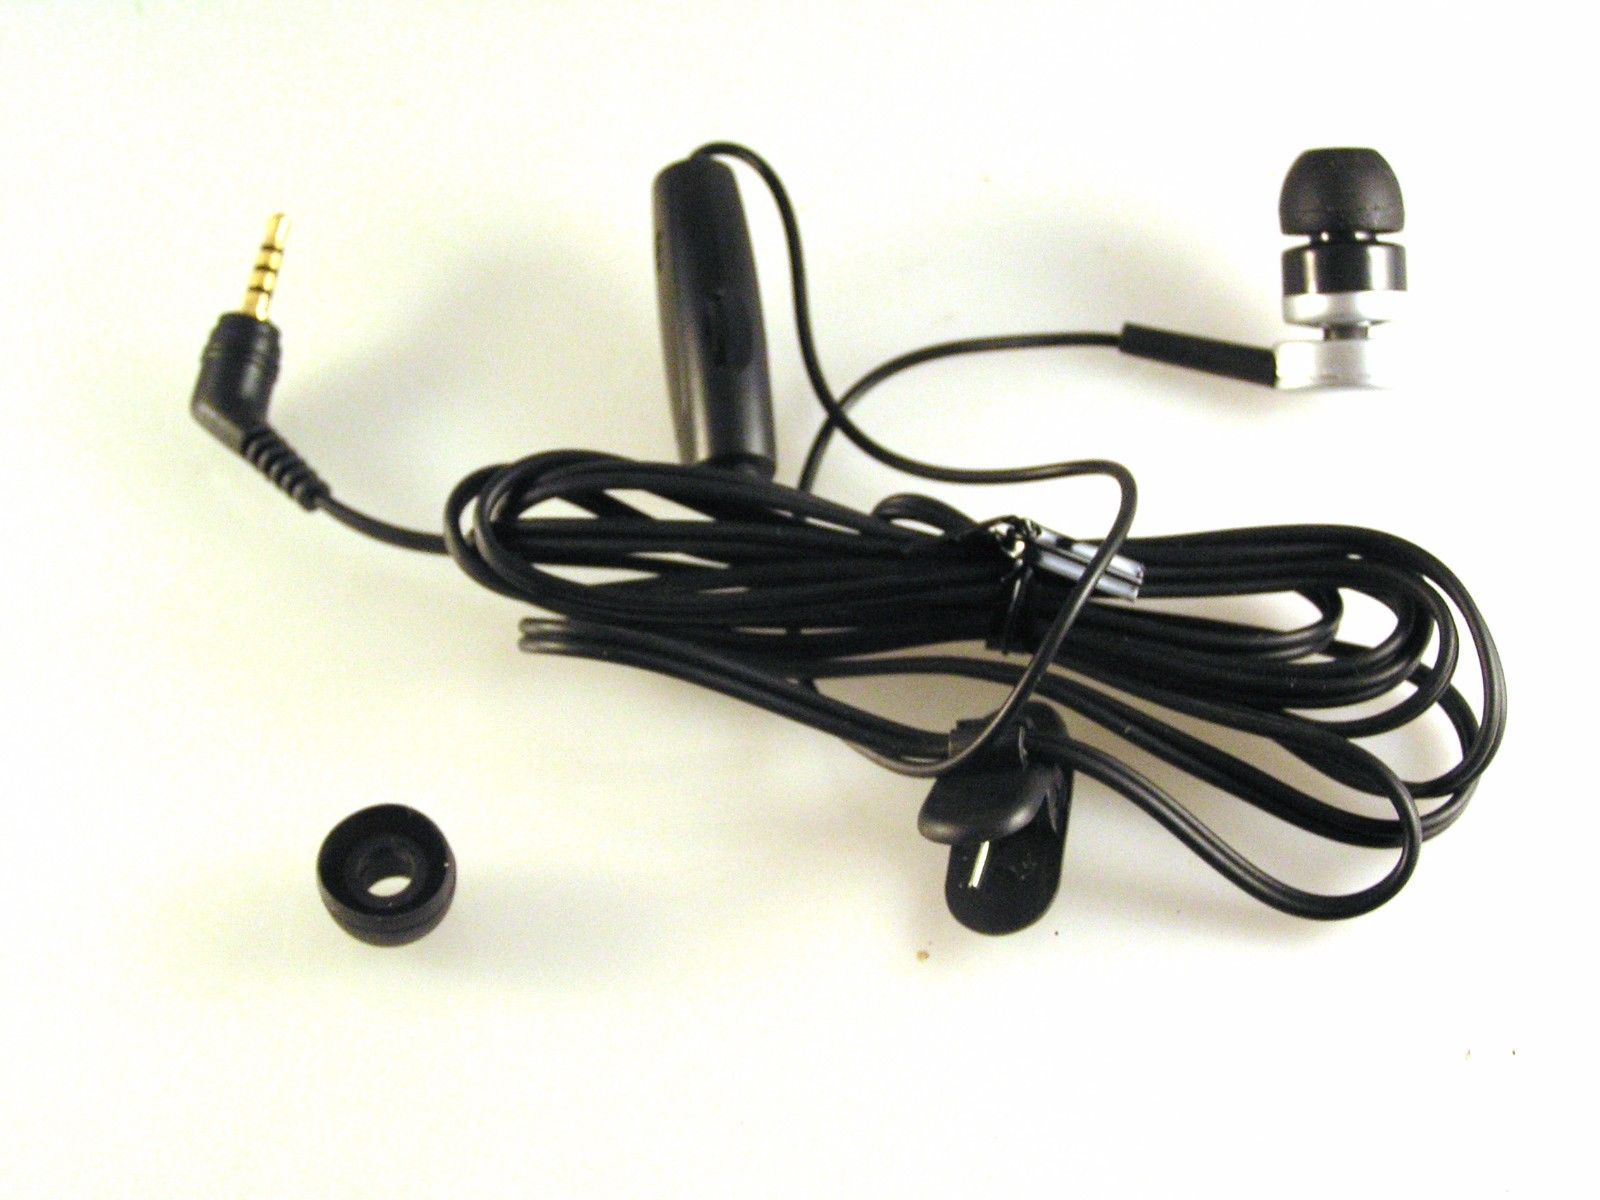 Mono Handsfree Earpiece With Mic For Many Mobile and DECT Phones OM1081